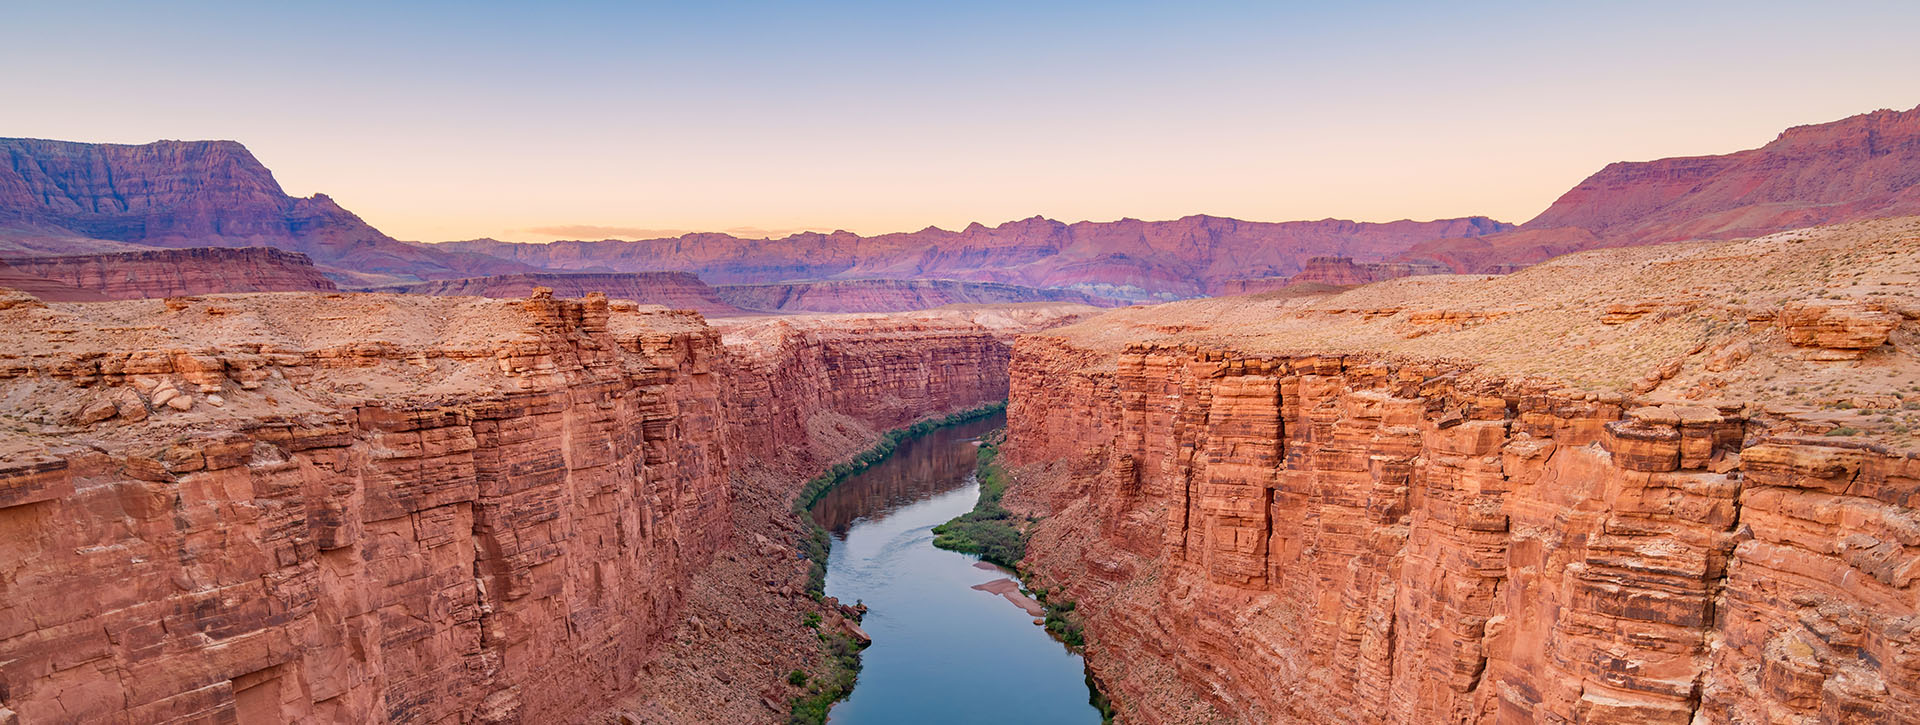 sunrise over a canyon river